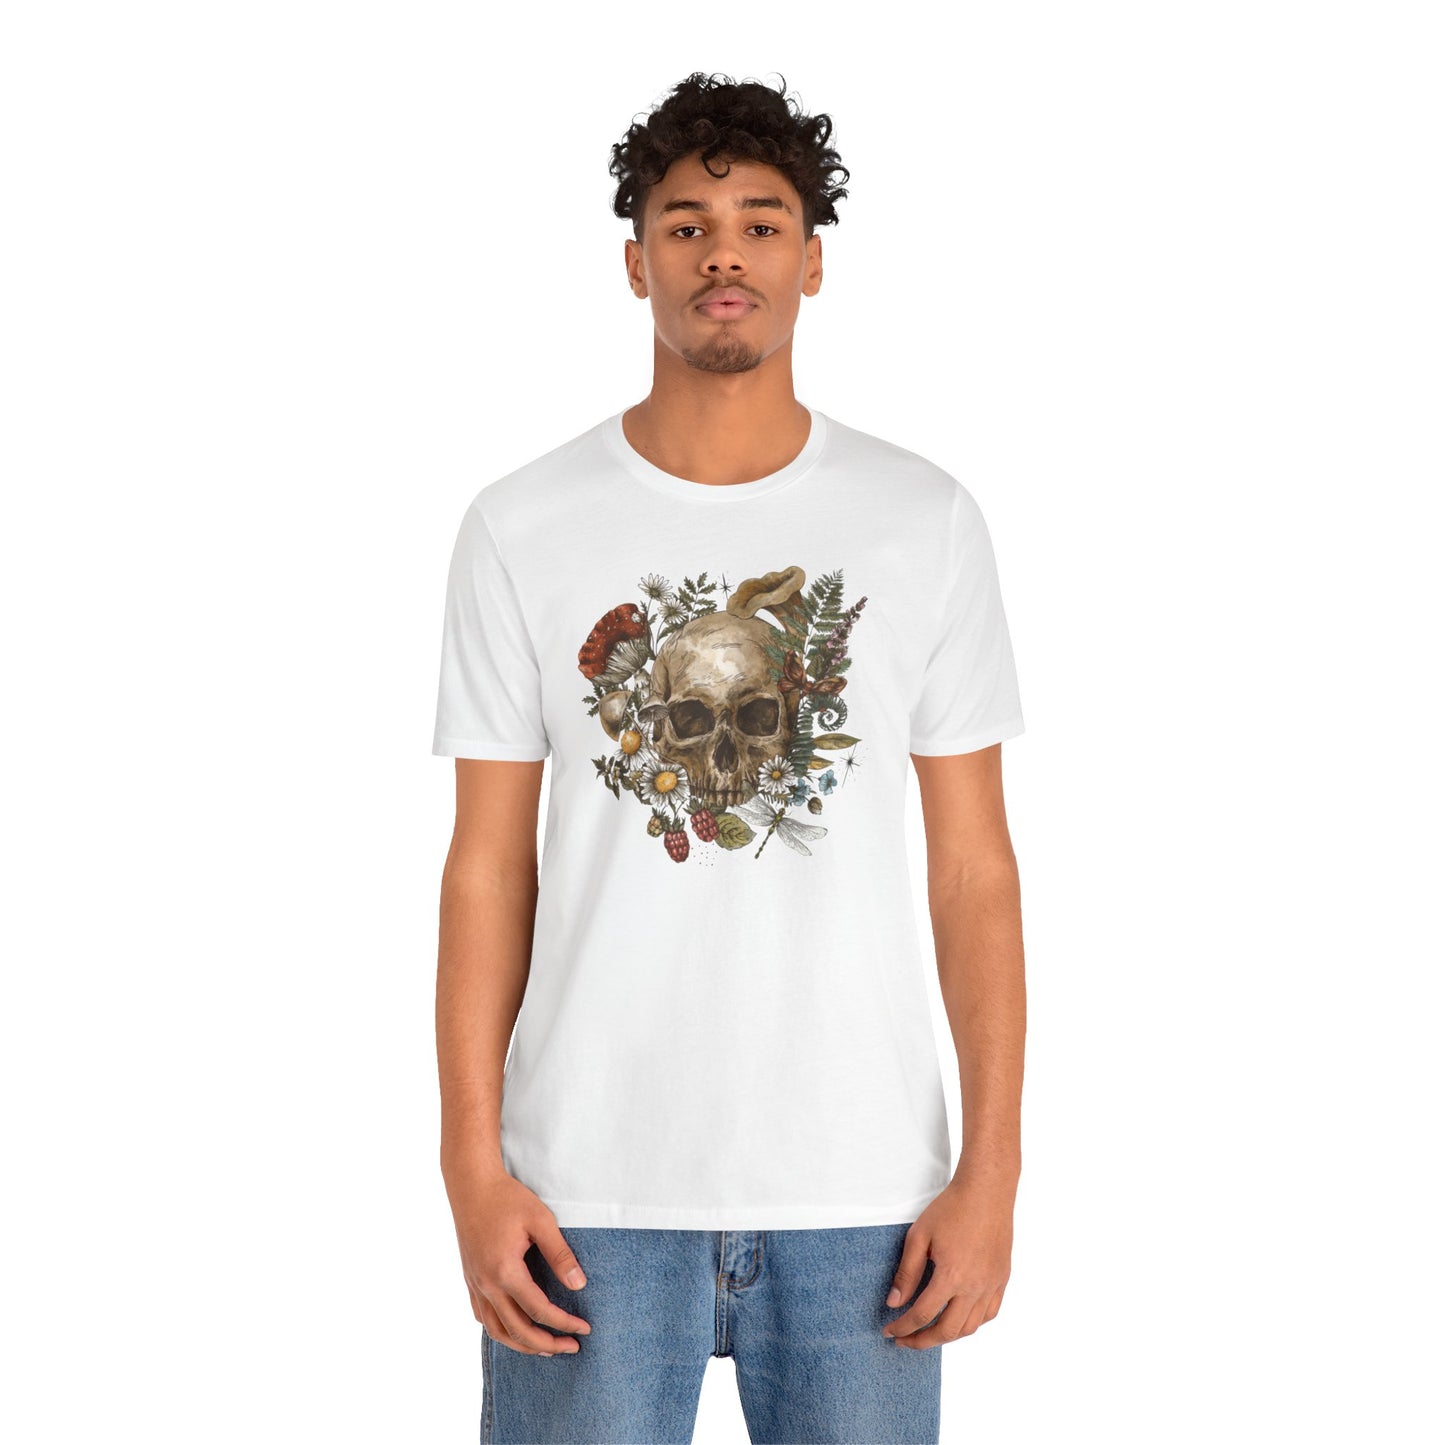 T-Shirt - Skull with Mushrooms Unisex Jersey Short Sleeve Tee, Soft and 100% Cotton, Runs True to Size, Sizes Small to 3XL